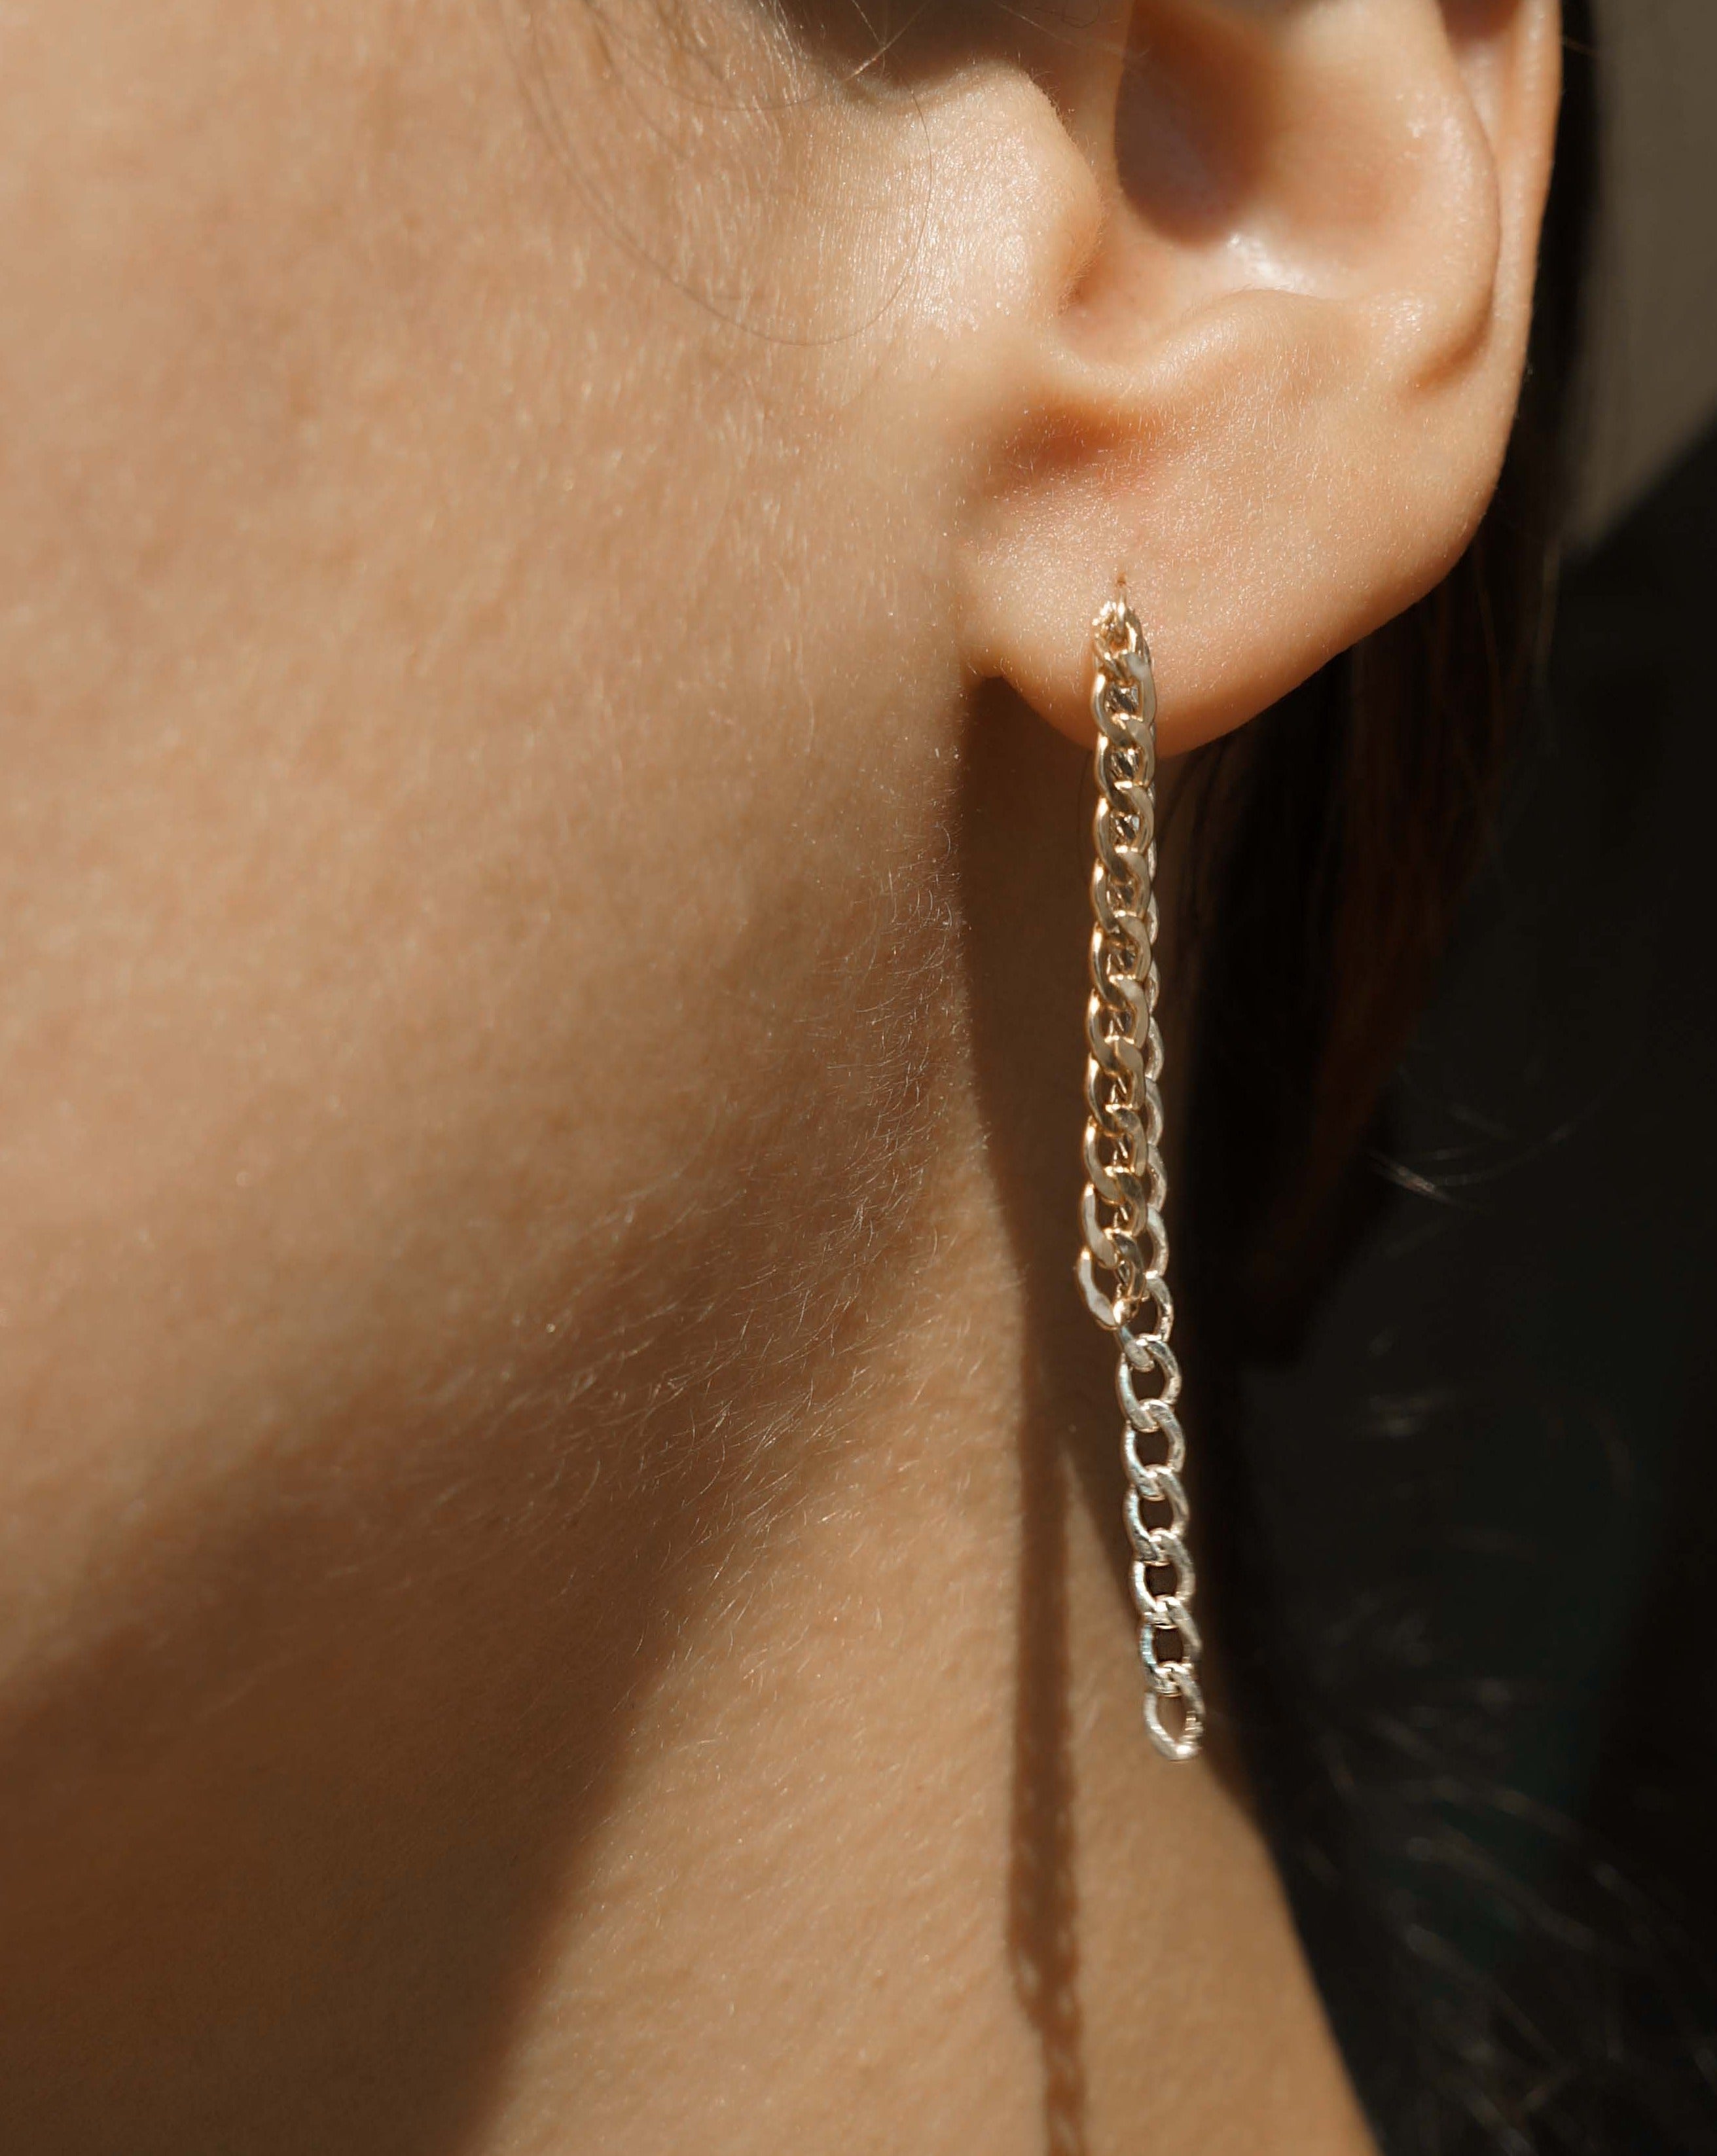 Cadenetta Earrings by KOZAKH. 3 inch drop double strand Flat Curb chain earrings in 14K Gold Filled and Sterling Silver. One strand is gold and one is silver.